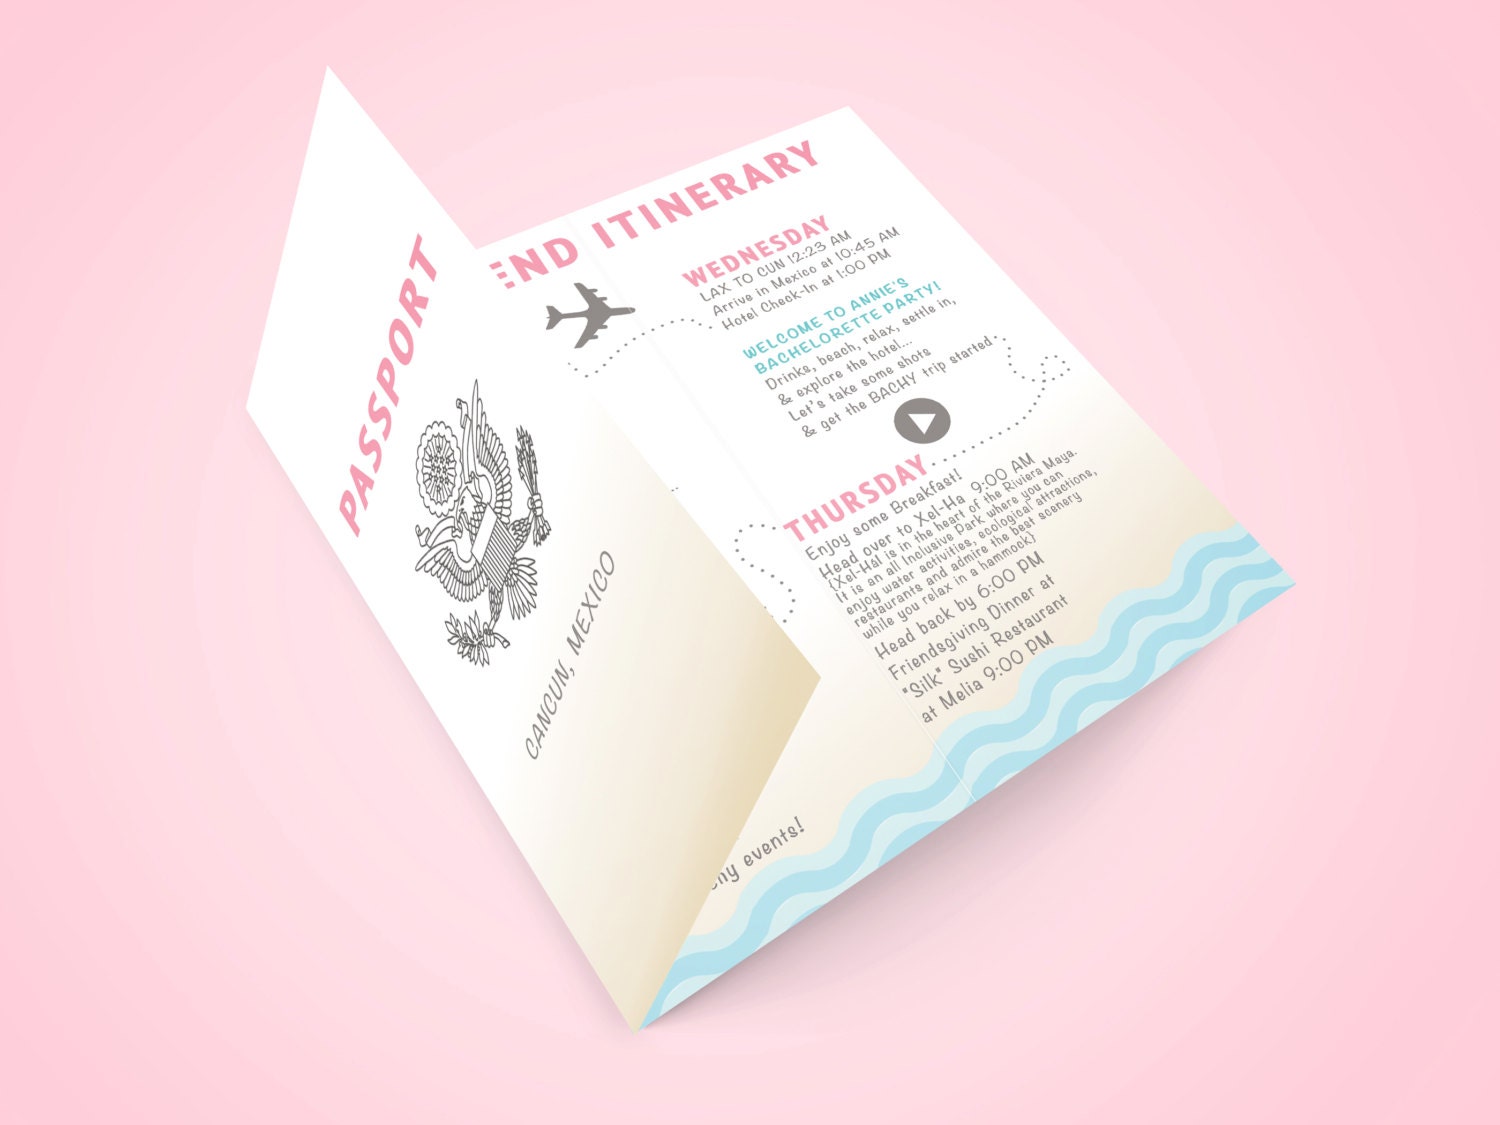 PASSPORT ITINERARY brochure tri-fold pamphlet features trip itinerary, games, info for tropical vacation or bachelorette party